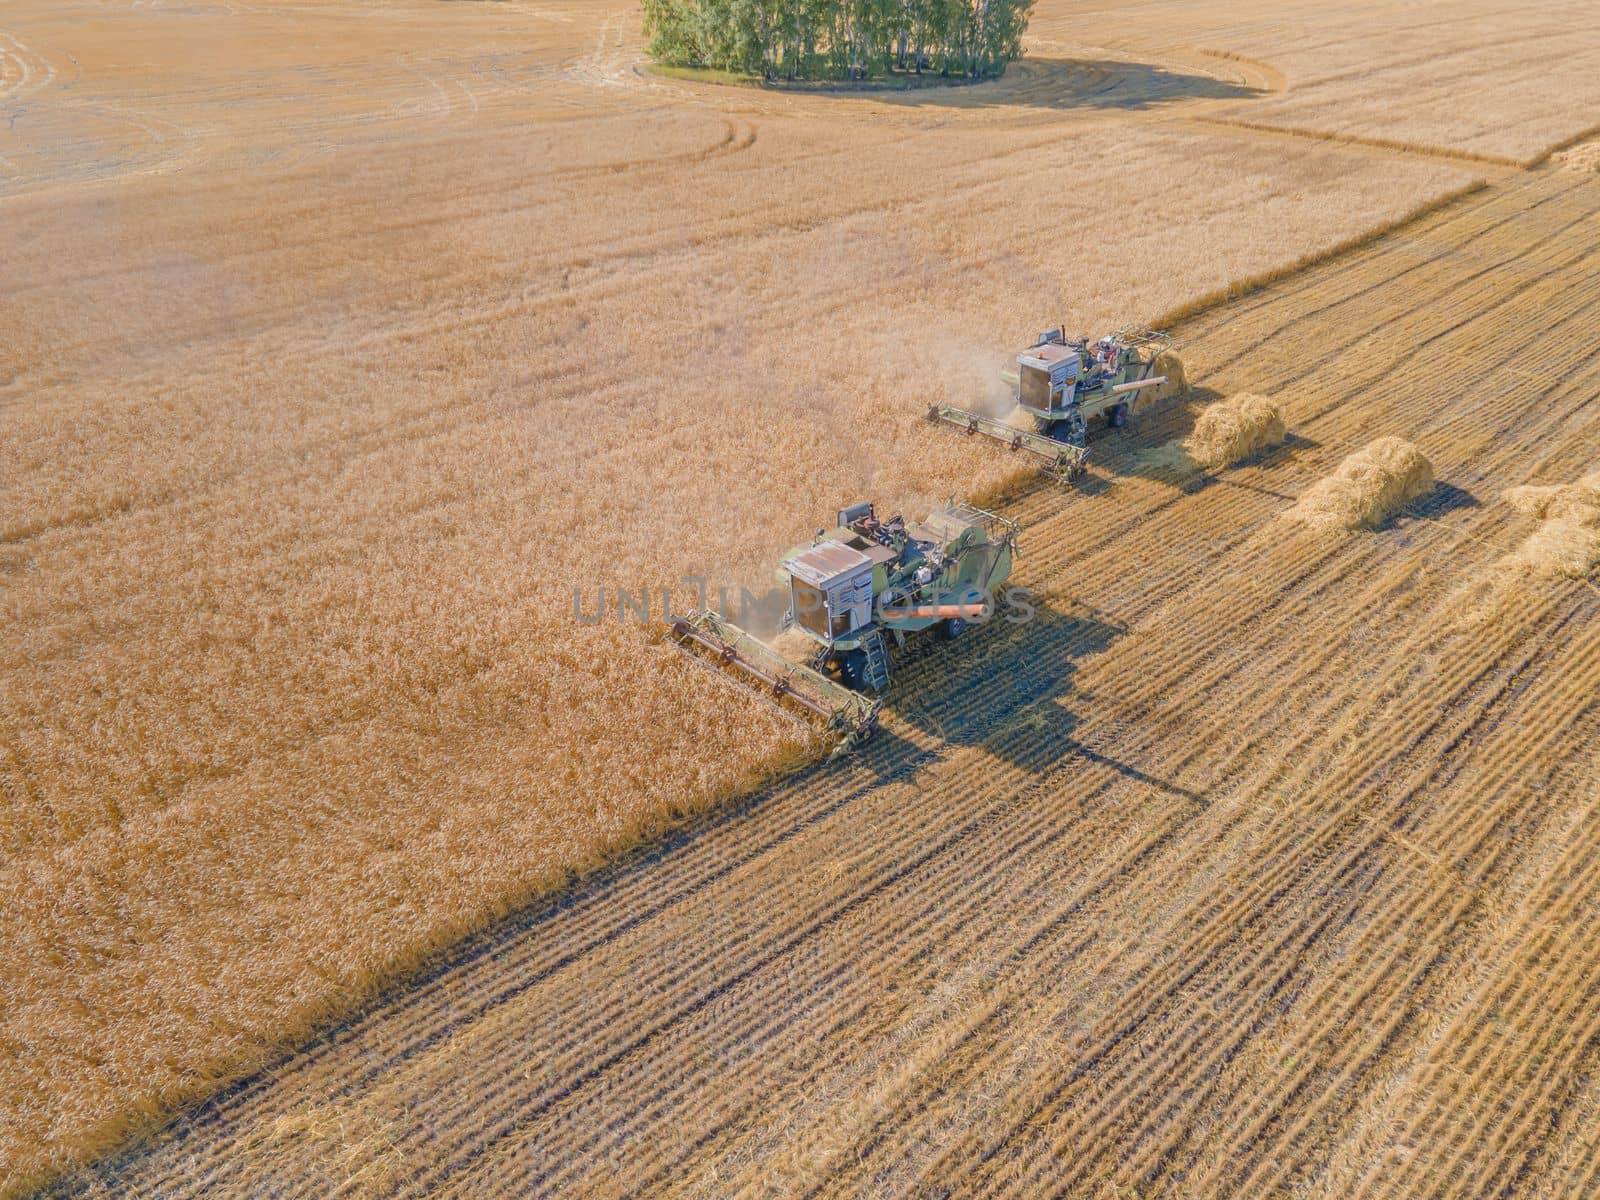 Harvest wheat grain and crop aerial view.Harvesting wheat,oats, barley in fields,ranches and farmlands.Combines mow in the field.Agro-industry.Combine Harvester Cutting on wheat filed.Machine harvest